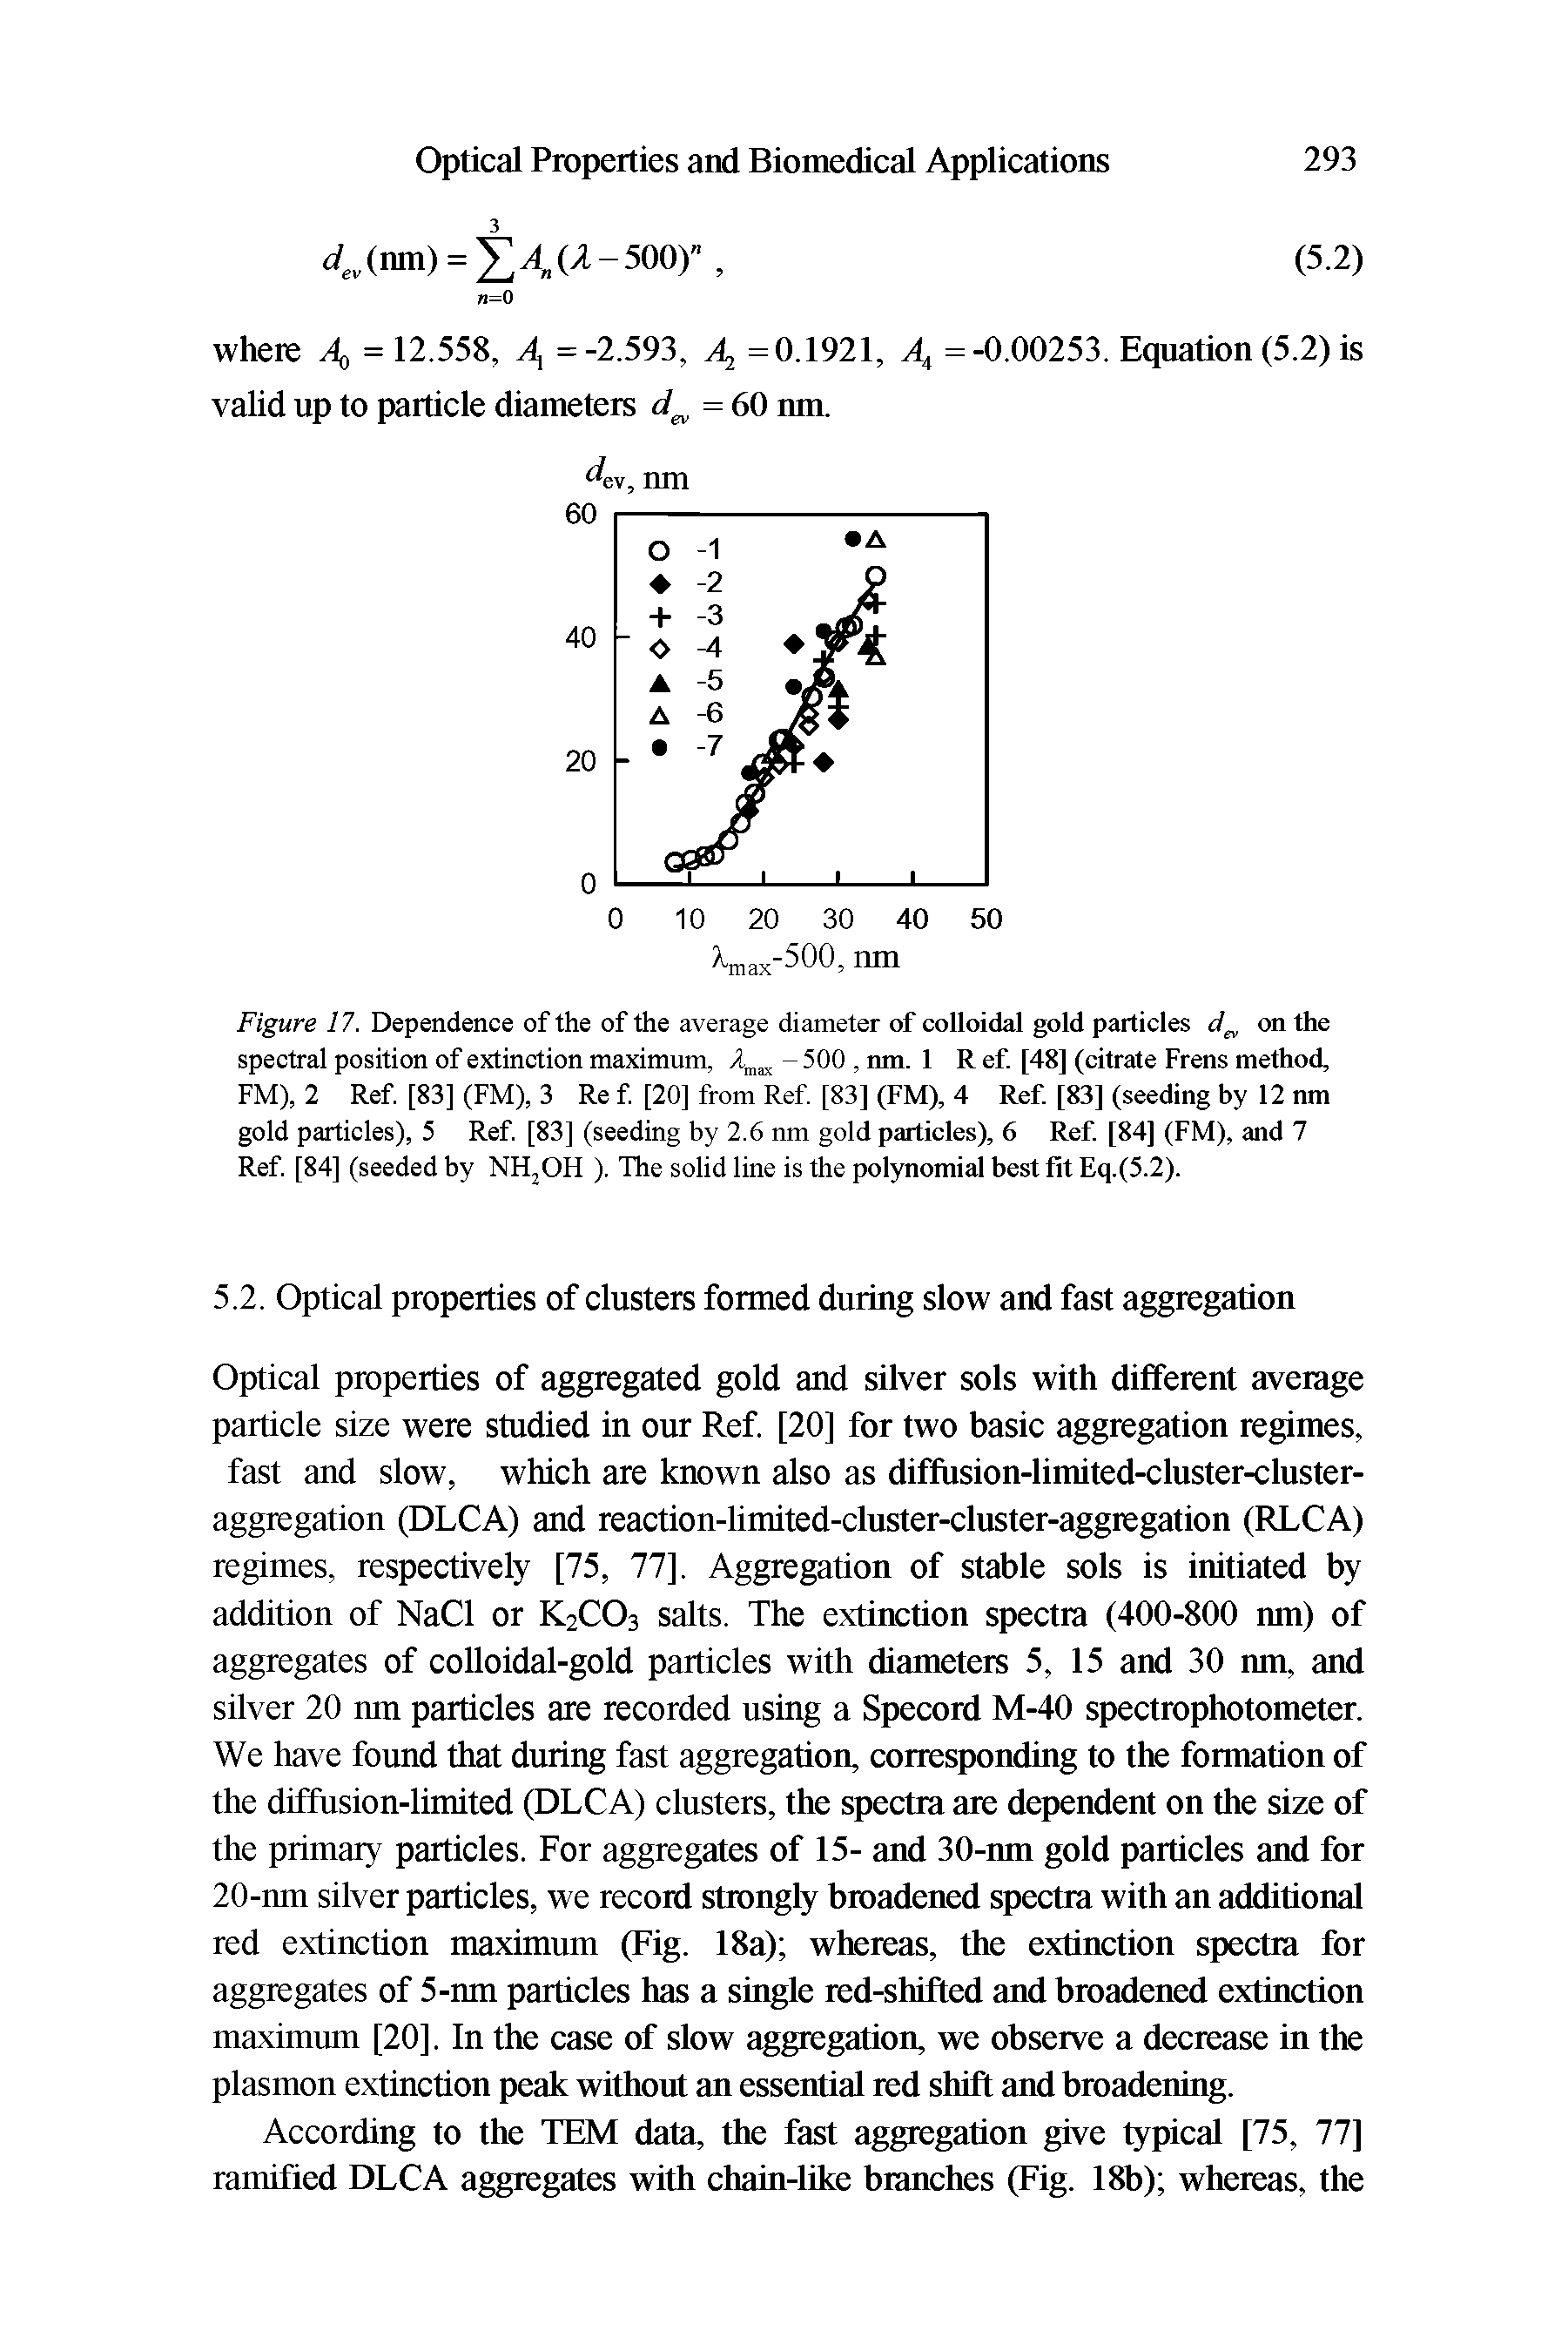 Figure 17. Dependence of the of the average diameter of colloidal gold particles on the spectral position of extinction maximum, - 500, nm. 1 R ef. [48] (citrate Frens method,...